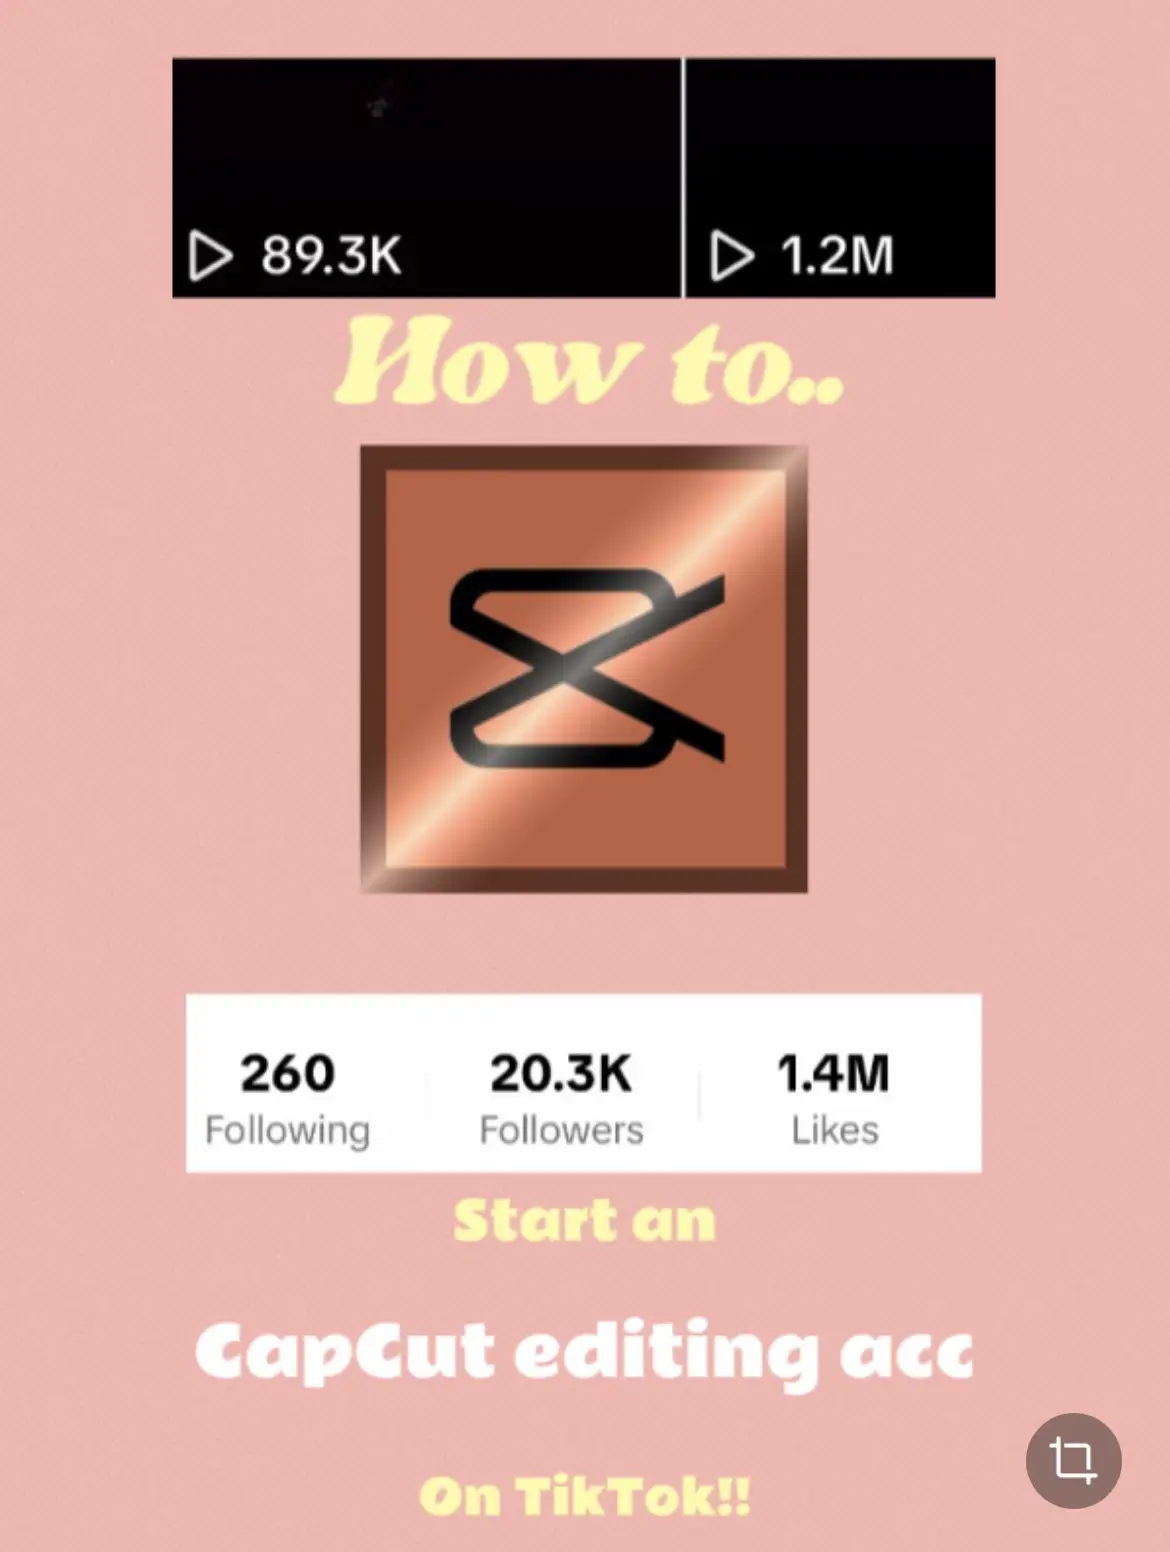  A screen showing how to start an account on TikTok.